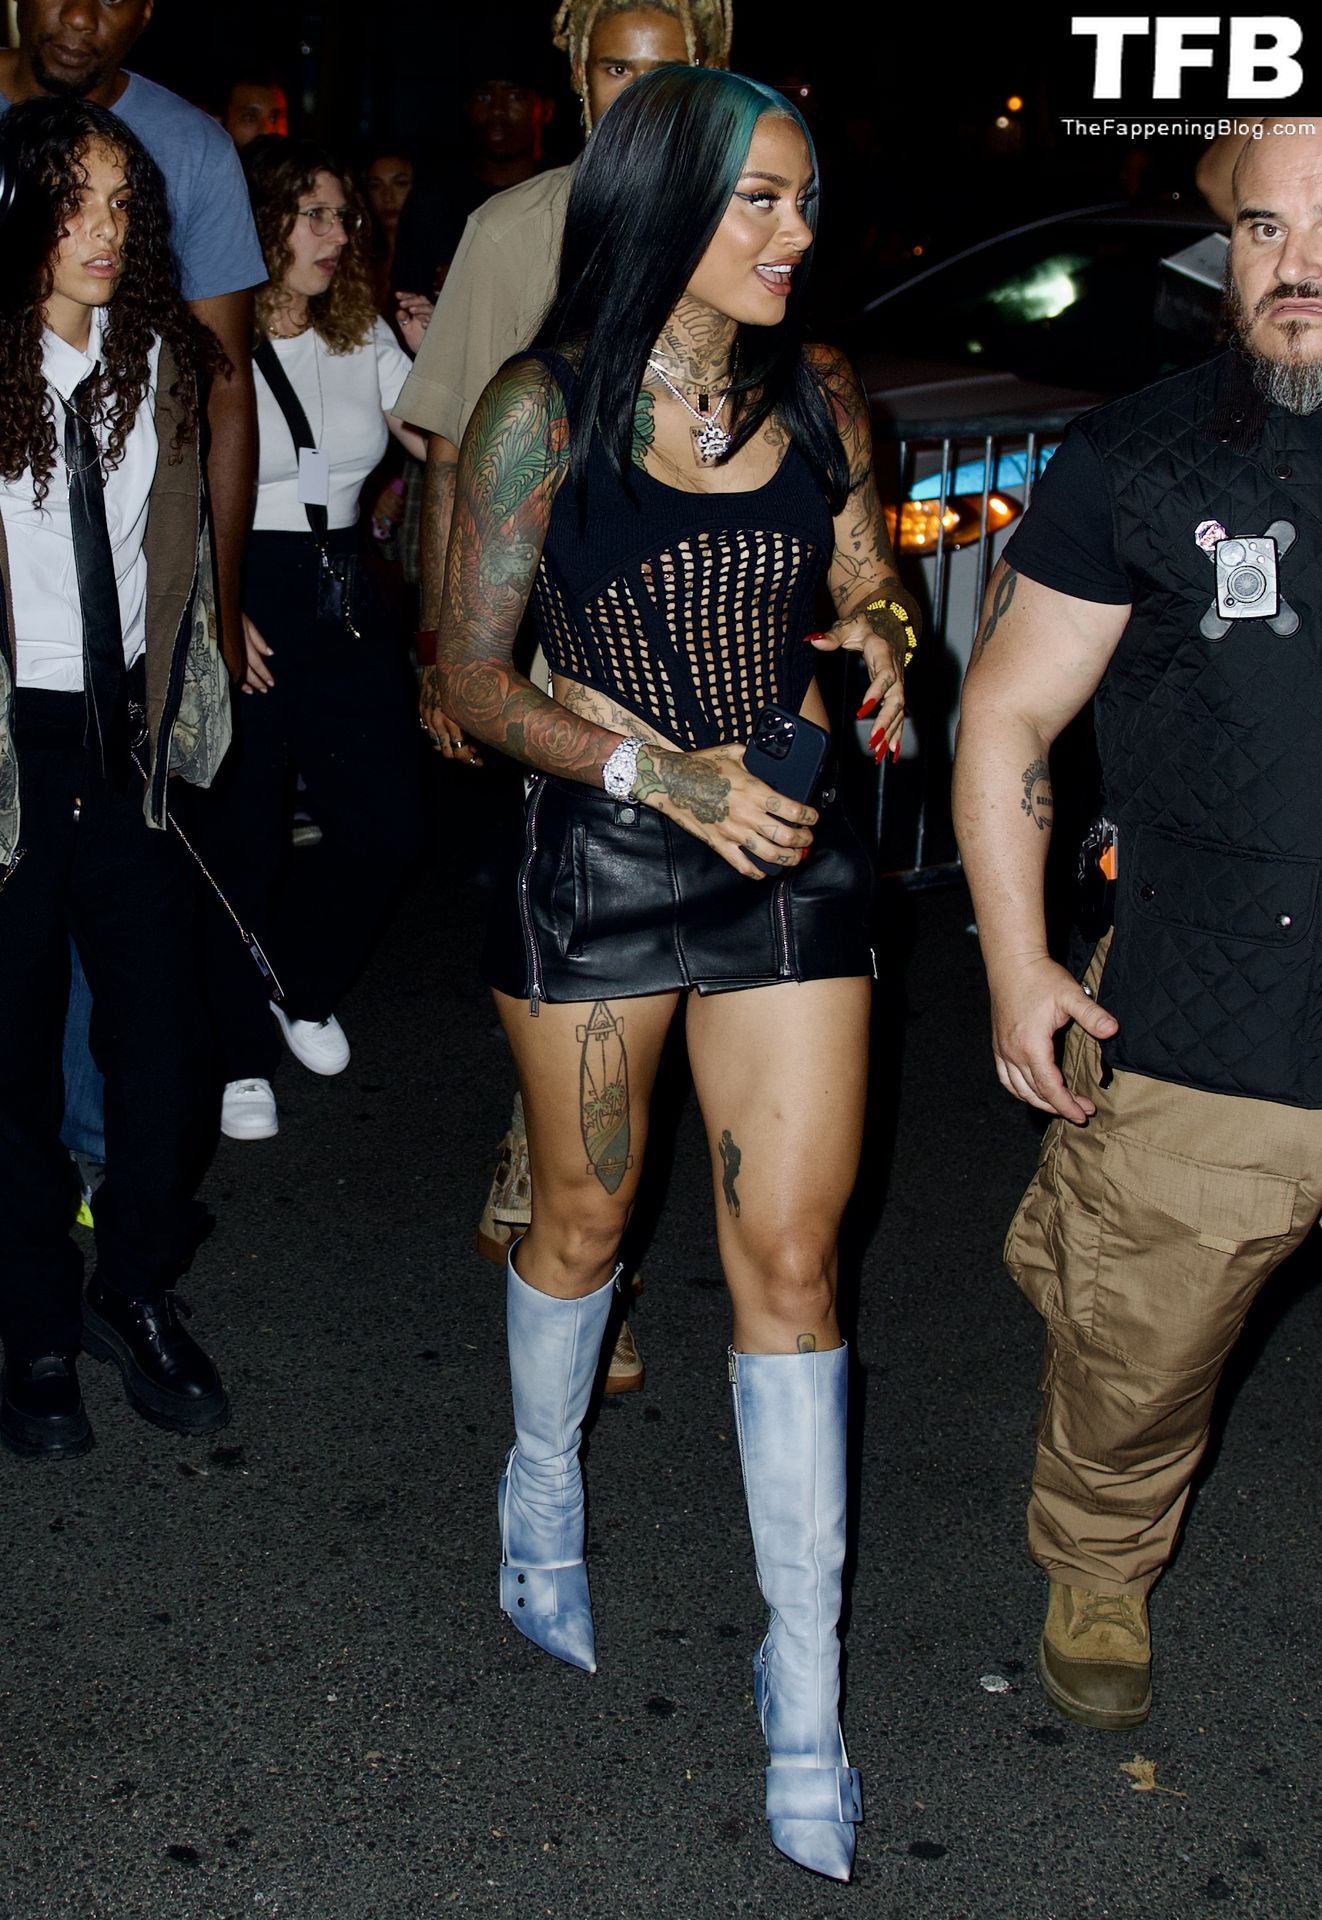 Kehlani See Through Nudity The Fappening Blog 11 - Kehlani Flashes Her Nude Tits in NYC (17 Photos)